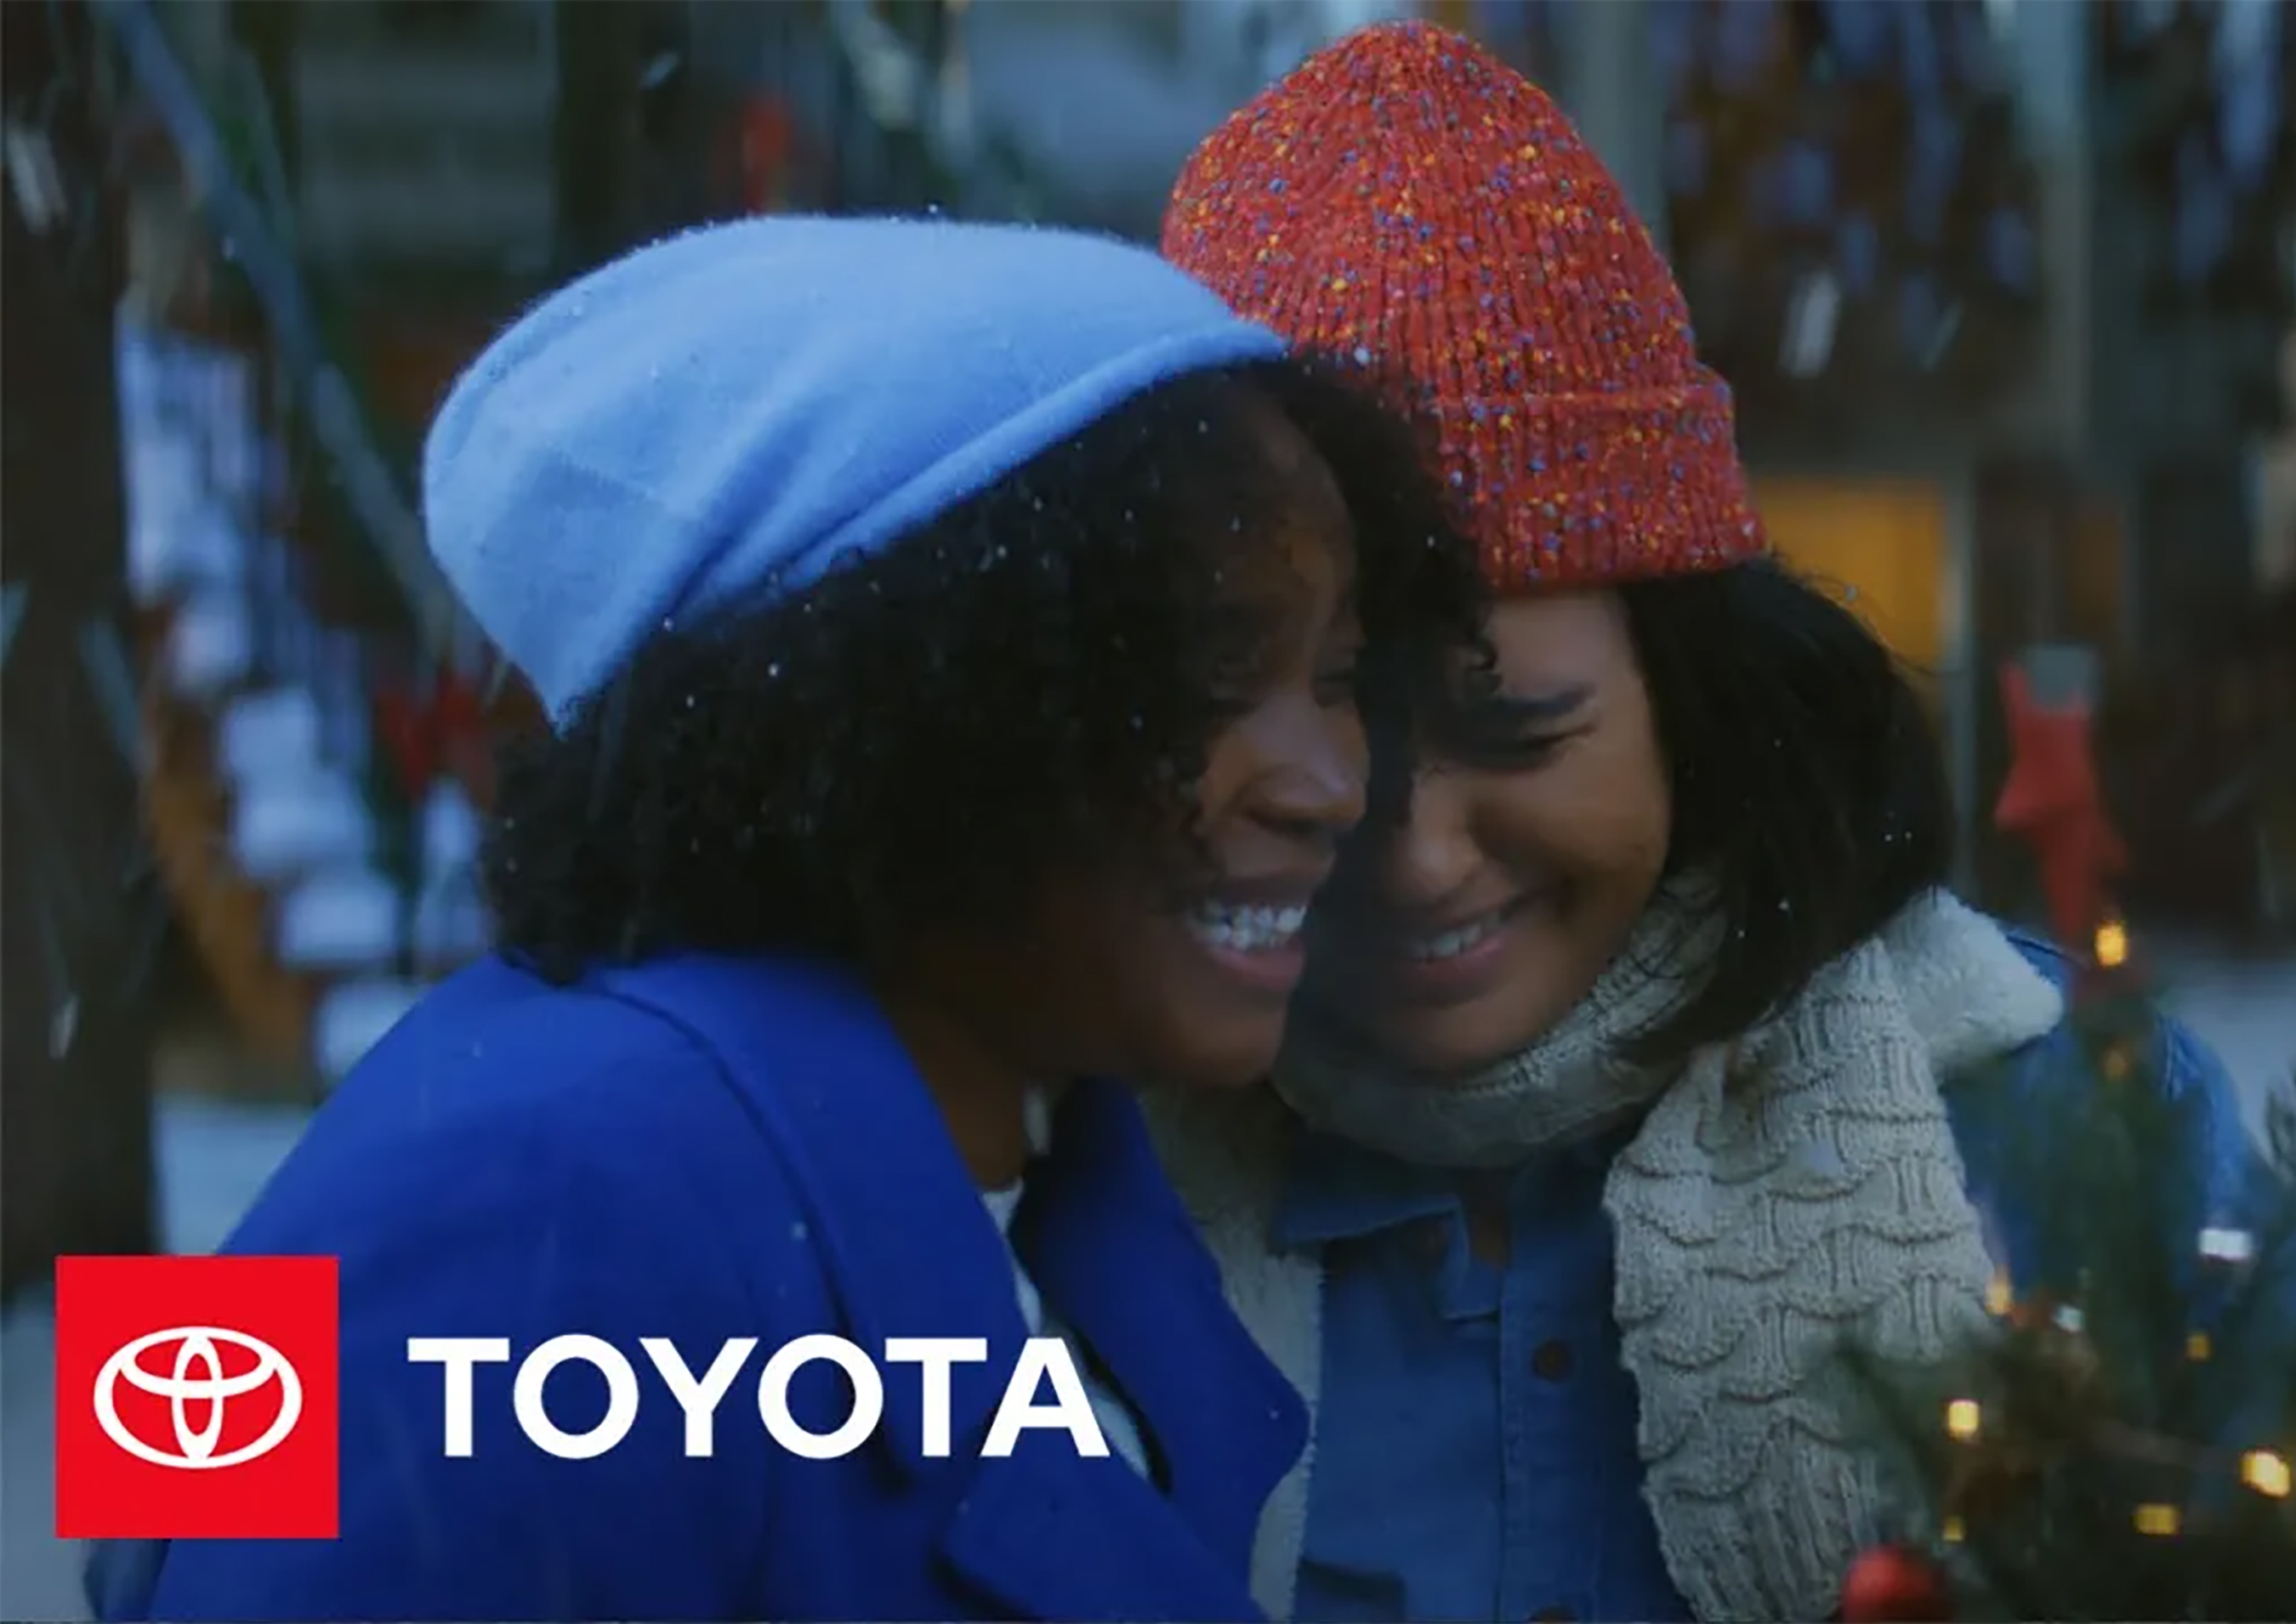 Play Video: Toyota’s holiday spot, “Like No One’s Watching,” shares a message of speading kindness, developed by Saatchi & Saatchi.